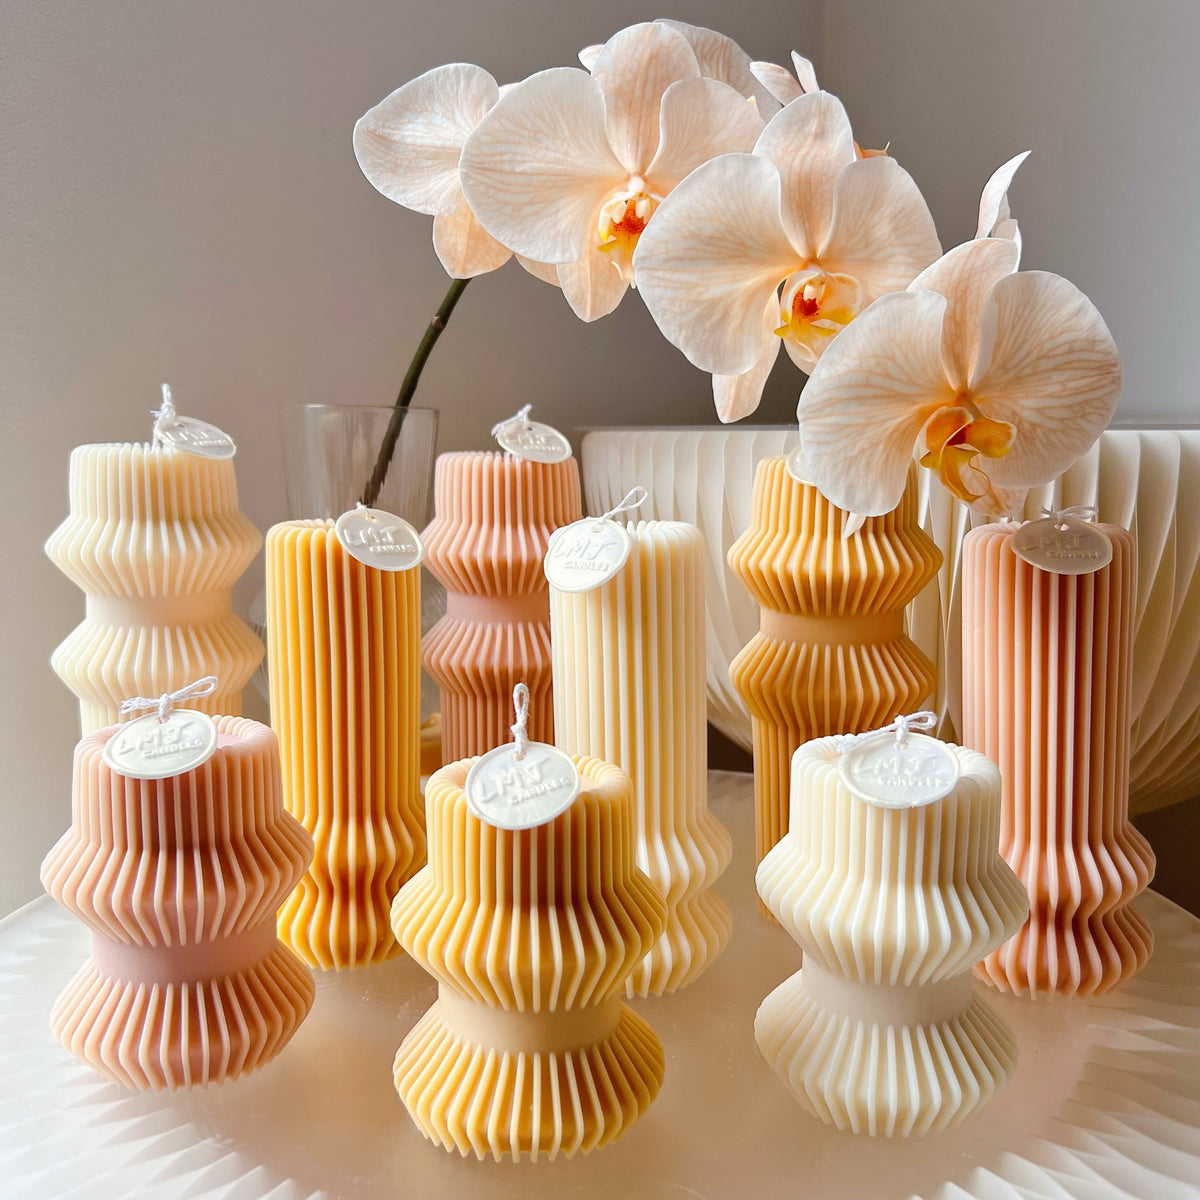 Ribbed Vase Pillar Candles, Peony Flower Candle, Decorative Candle, Handmade Scented Soy Wax Candle Australia | LMJ Candles